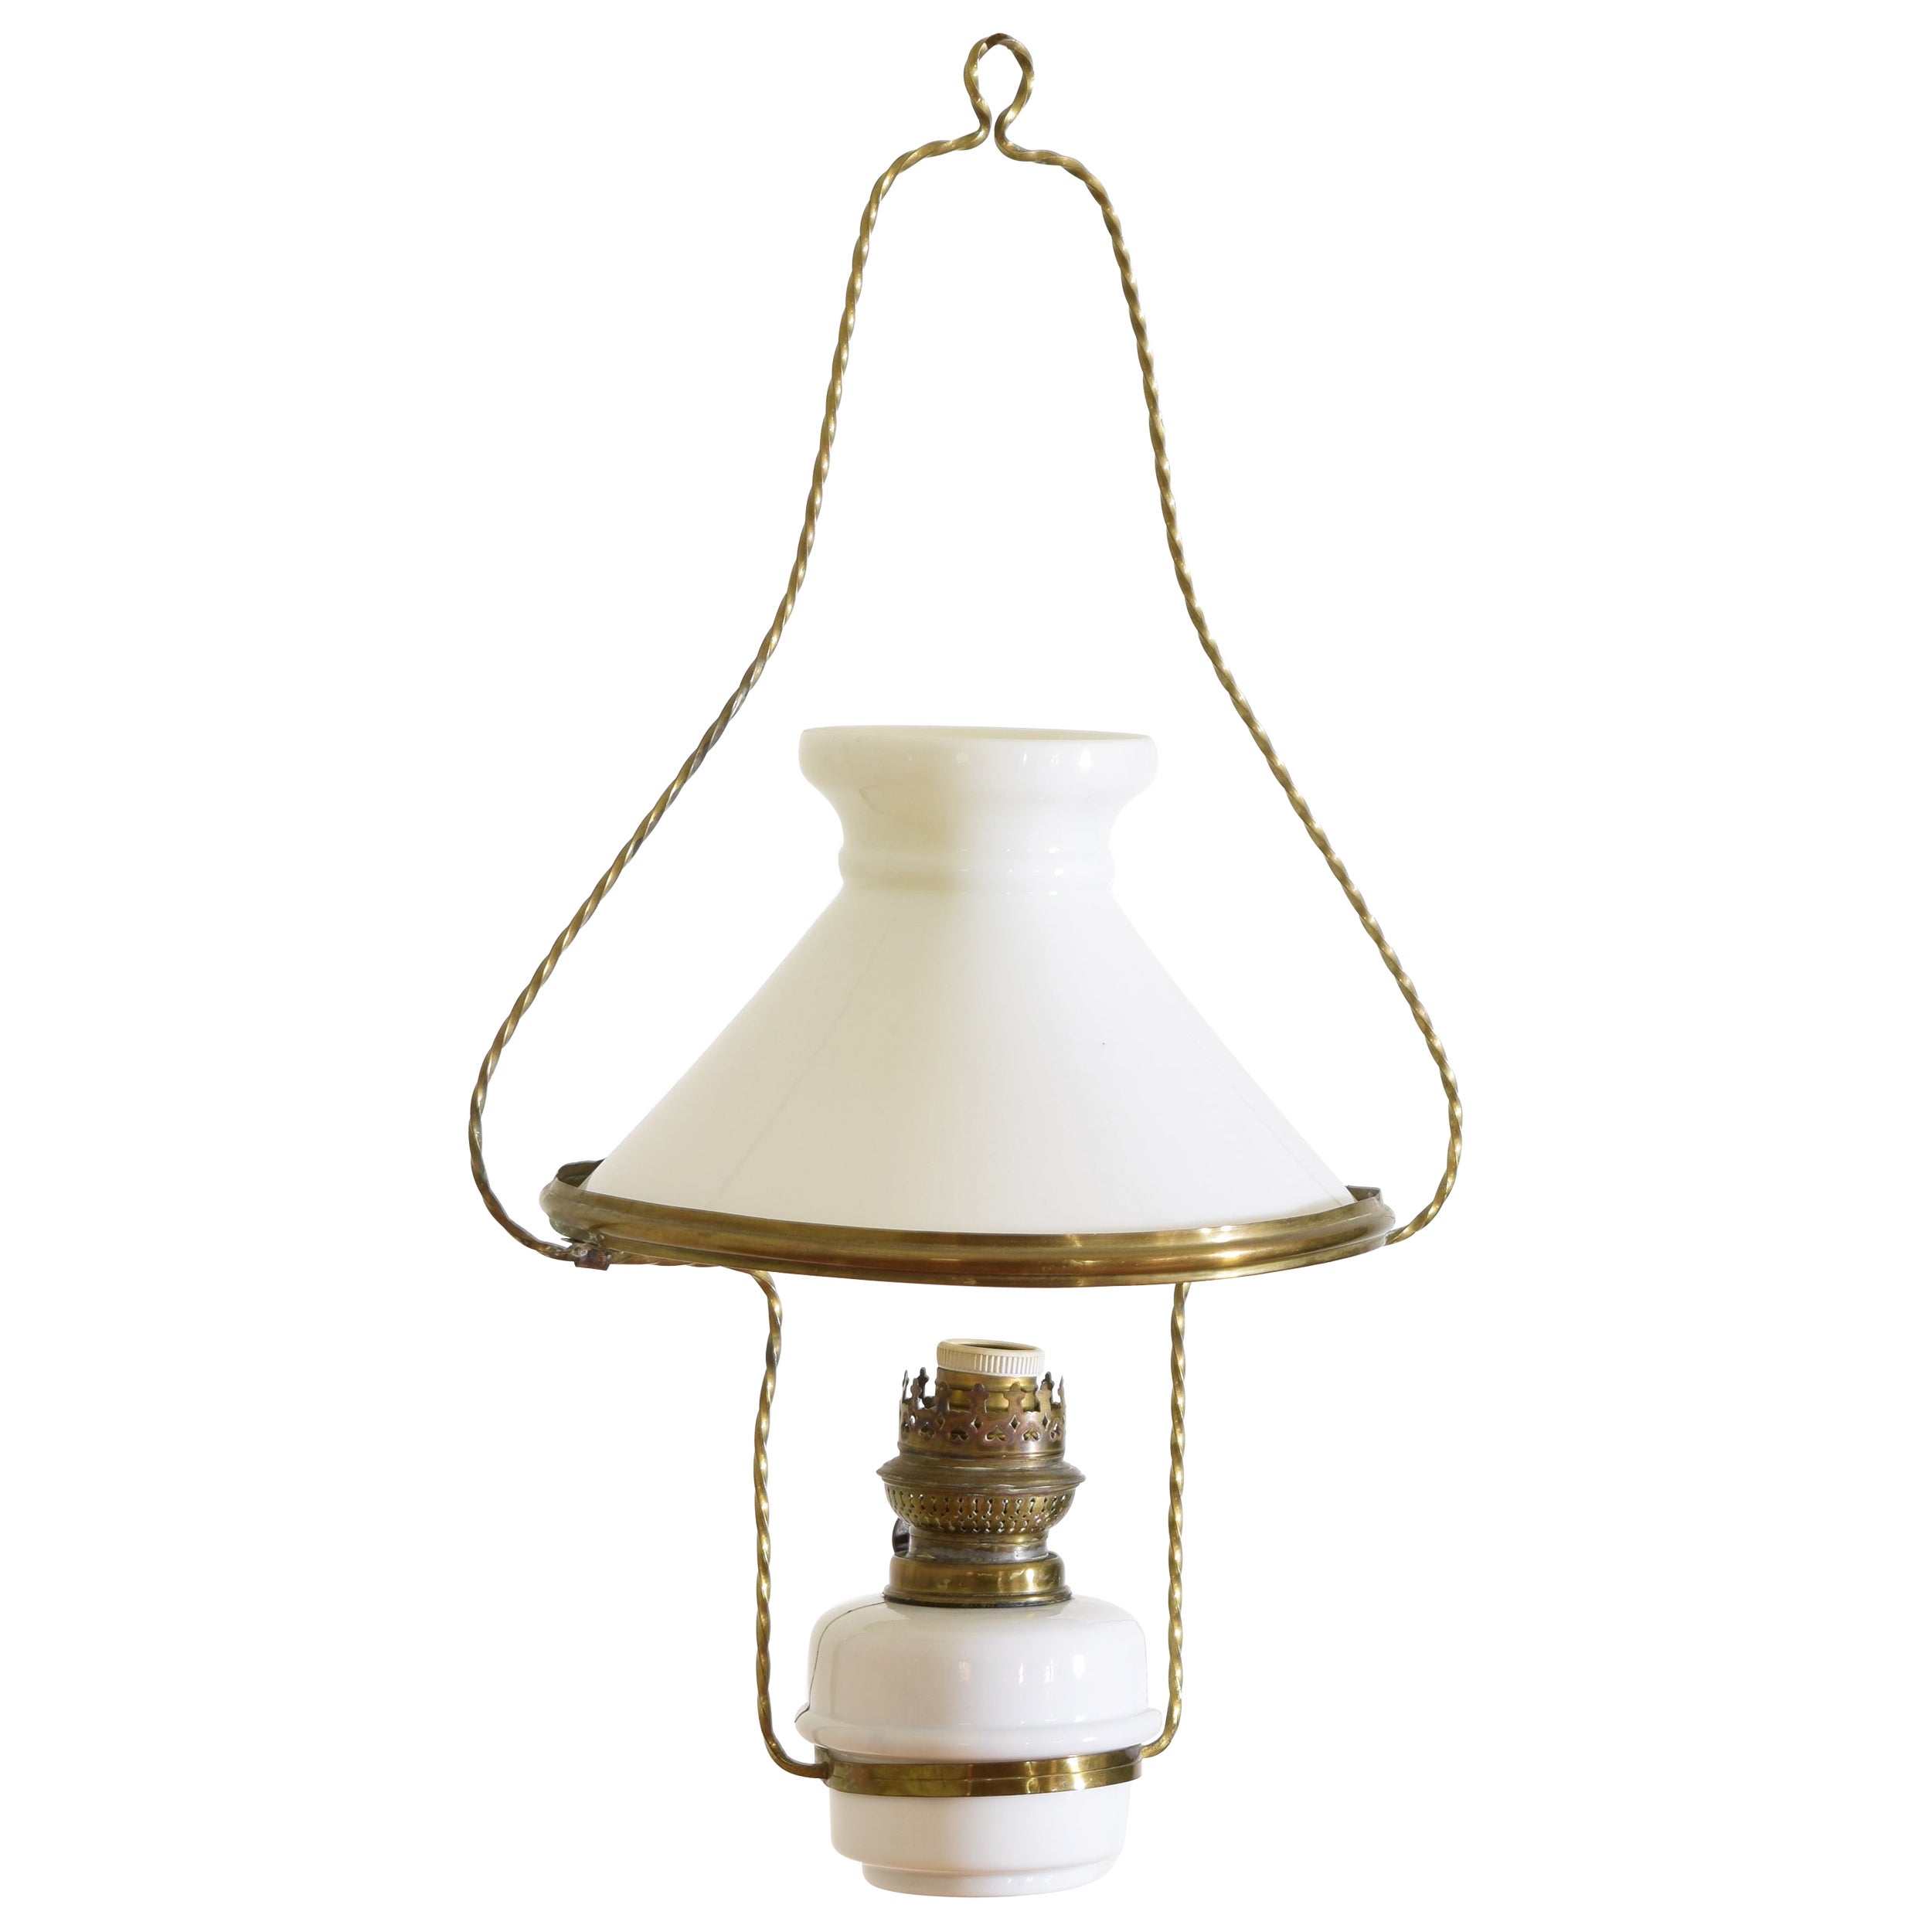 French Brass and White Glass Hanging Oil Lamp, now electrified, early 20th cen.